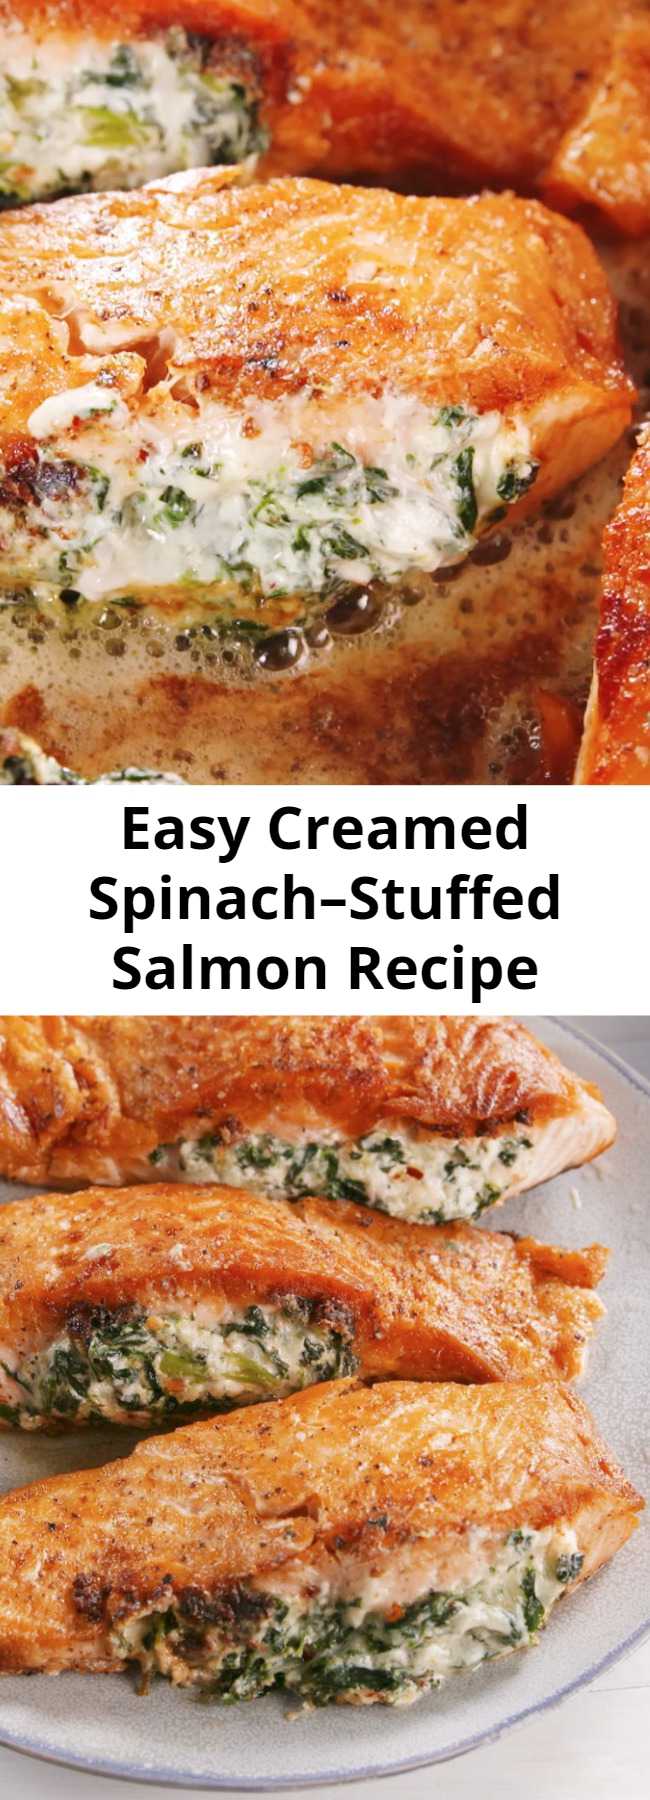 Creamed Spinach–Stuffed Salmon Recipe - If you're skeptical about the combination of cheese and salmon, don't be. We promise you, it's AMAZING. #easy #recipe #salmon #stuffed #seafood #dinners #creamcheese #cheesy #garlic #stuffing